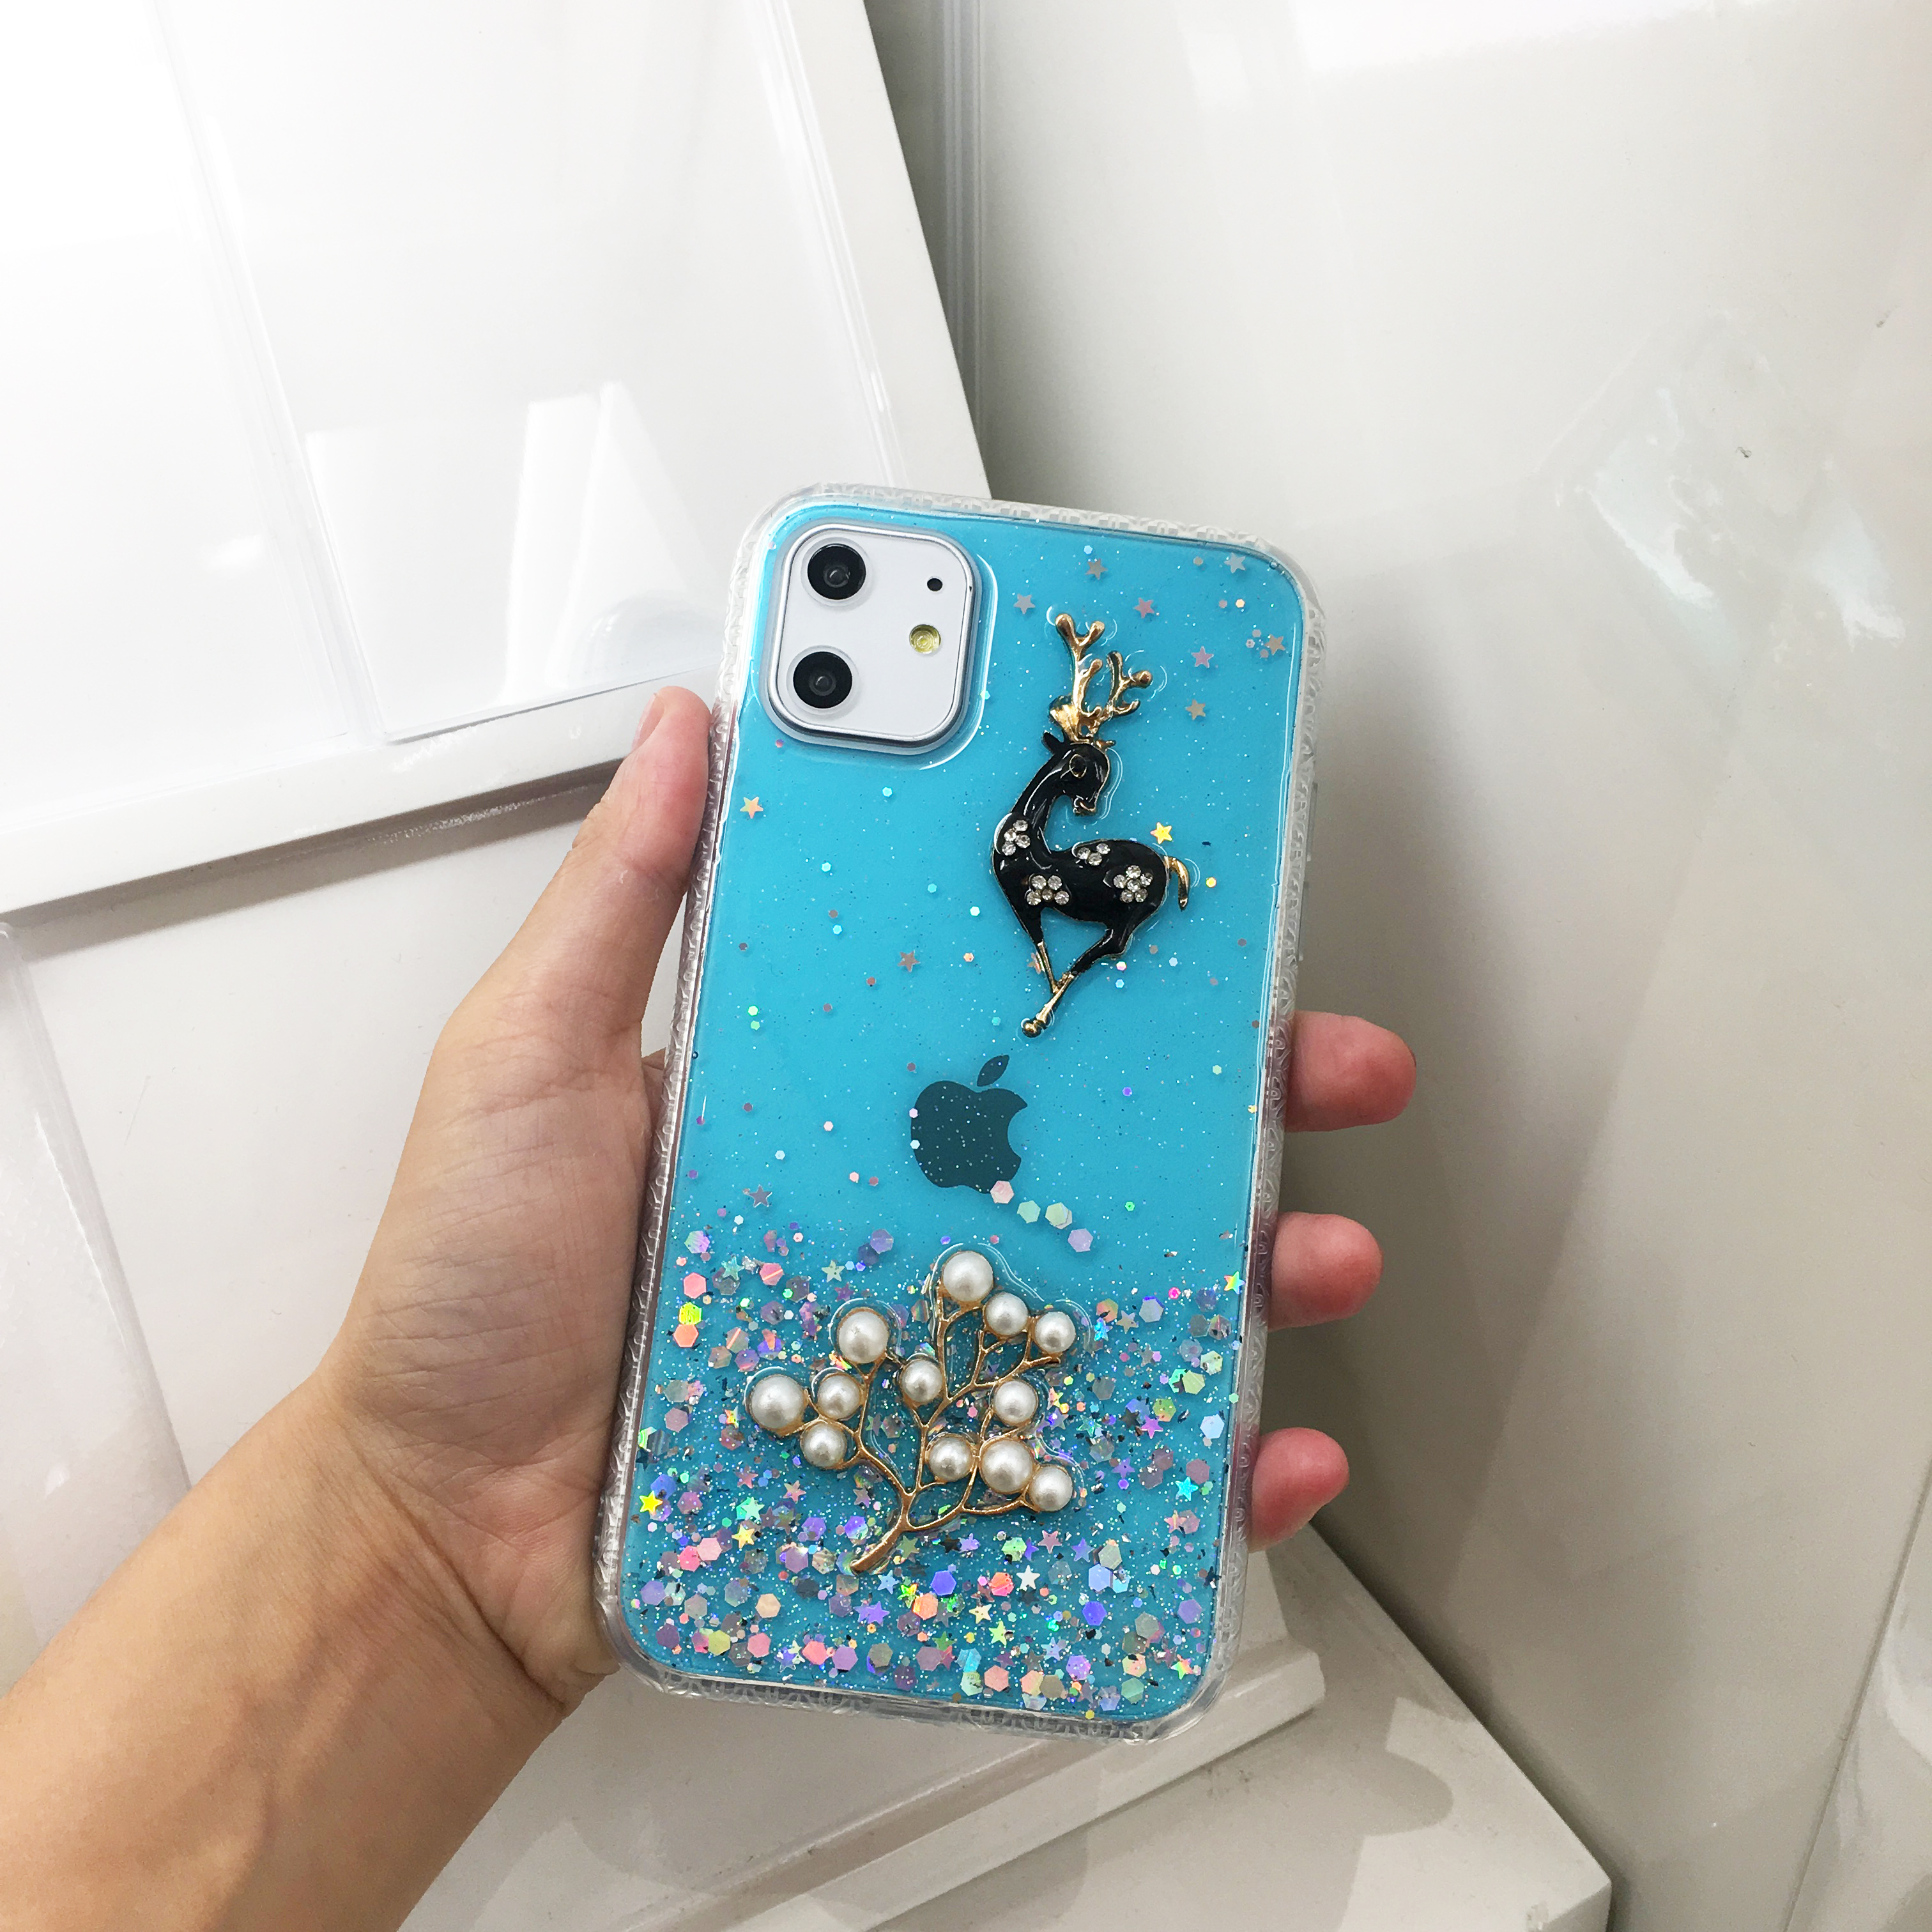 iPhone 11 Pro Max (6.5in) 3D Deer Crystal DIAMOND Shiny Case (Blue)